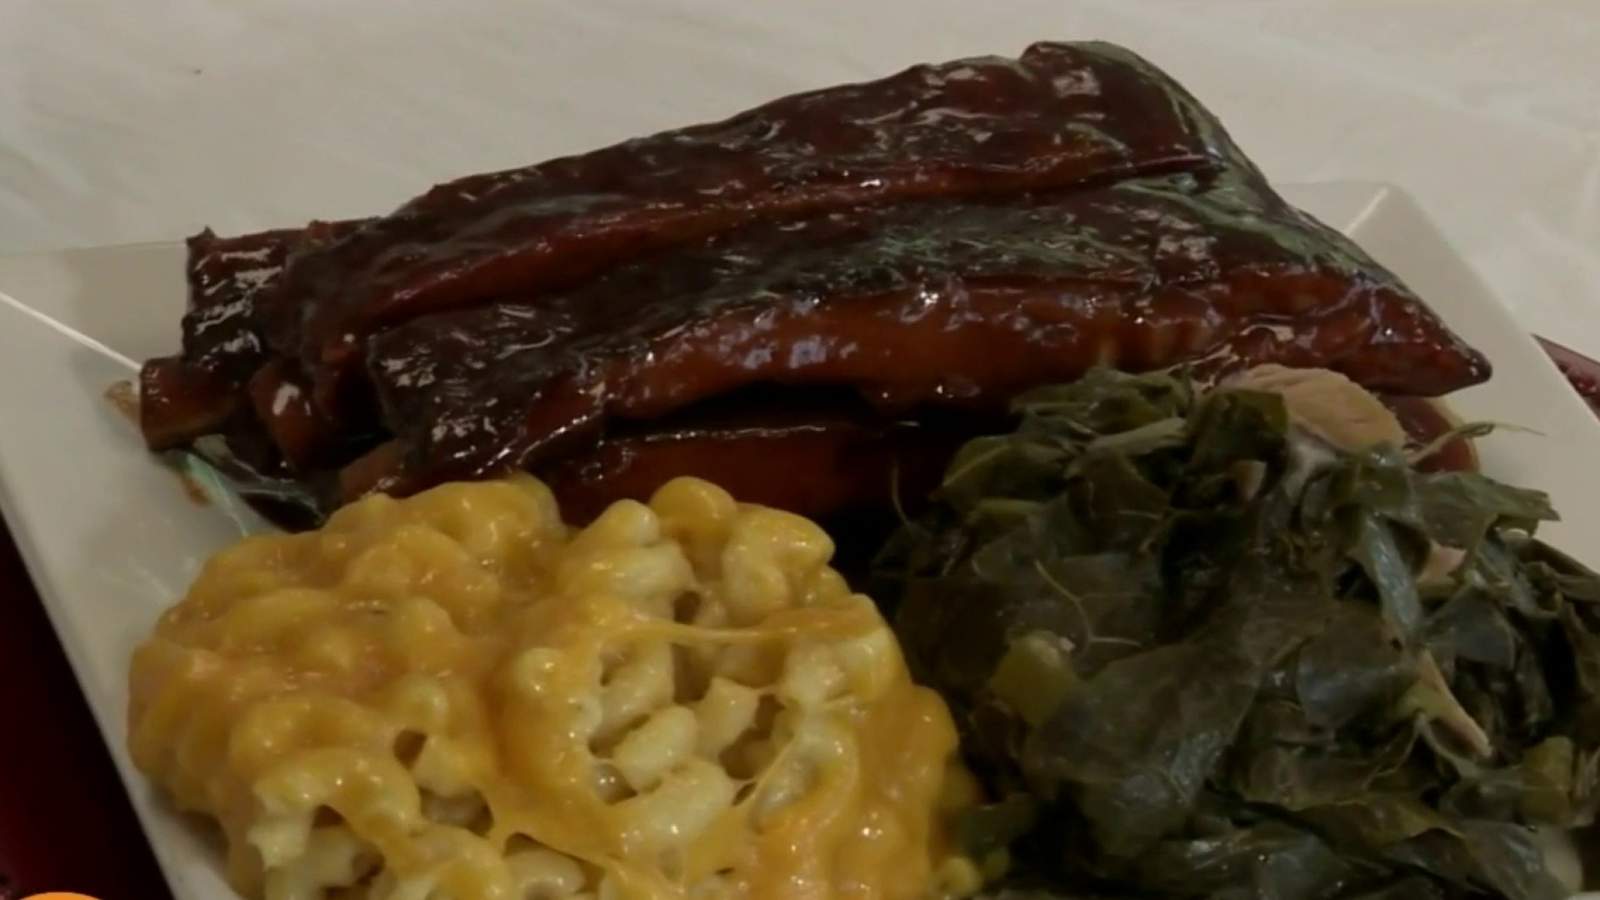 Celebrate National Soul Food Month and treat yo self to take-out from this Detroit favorite!